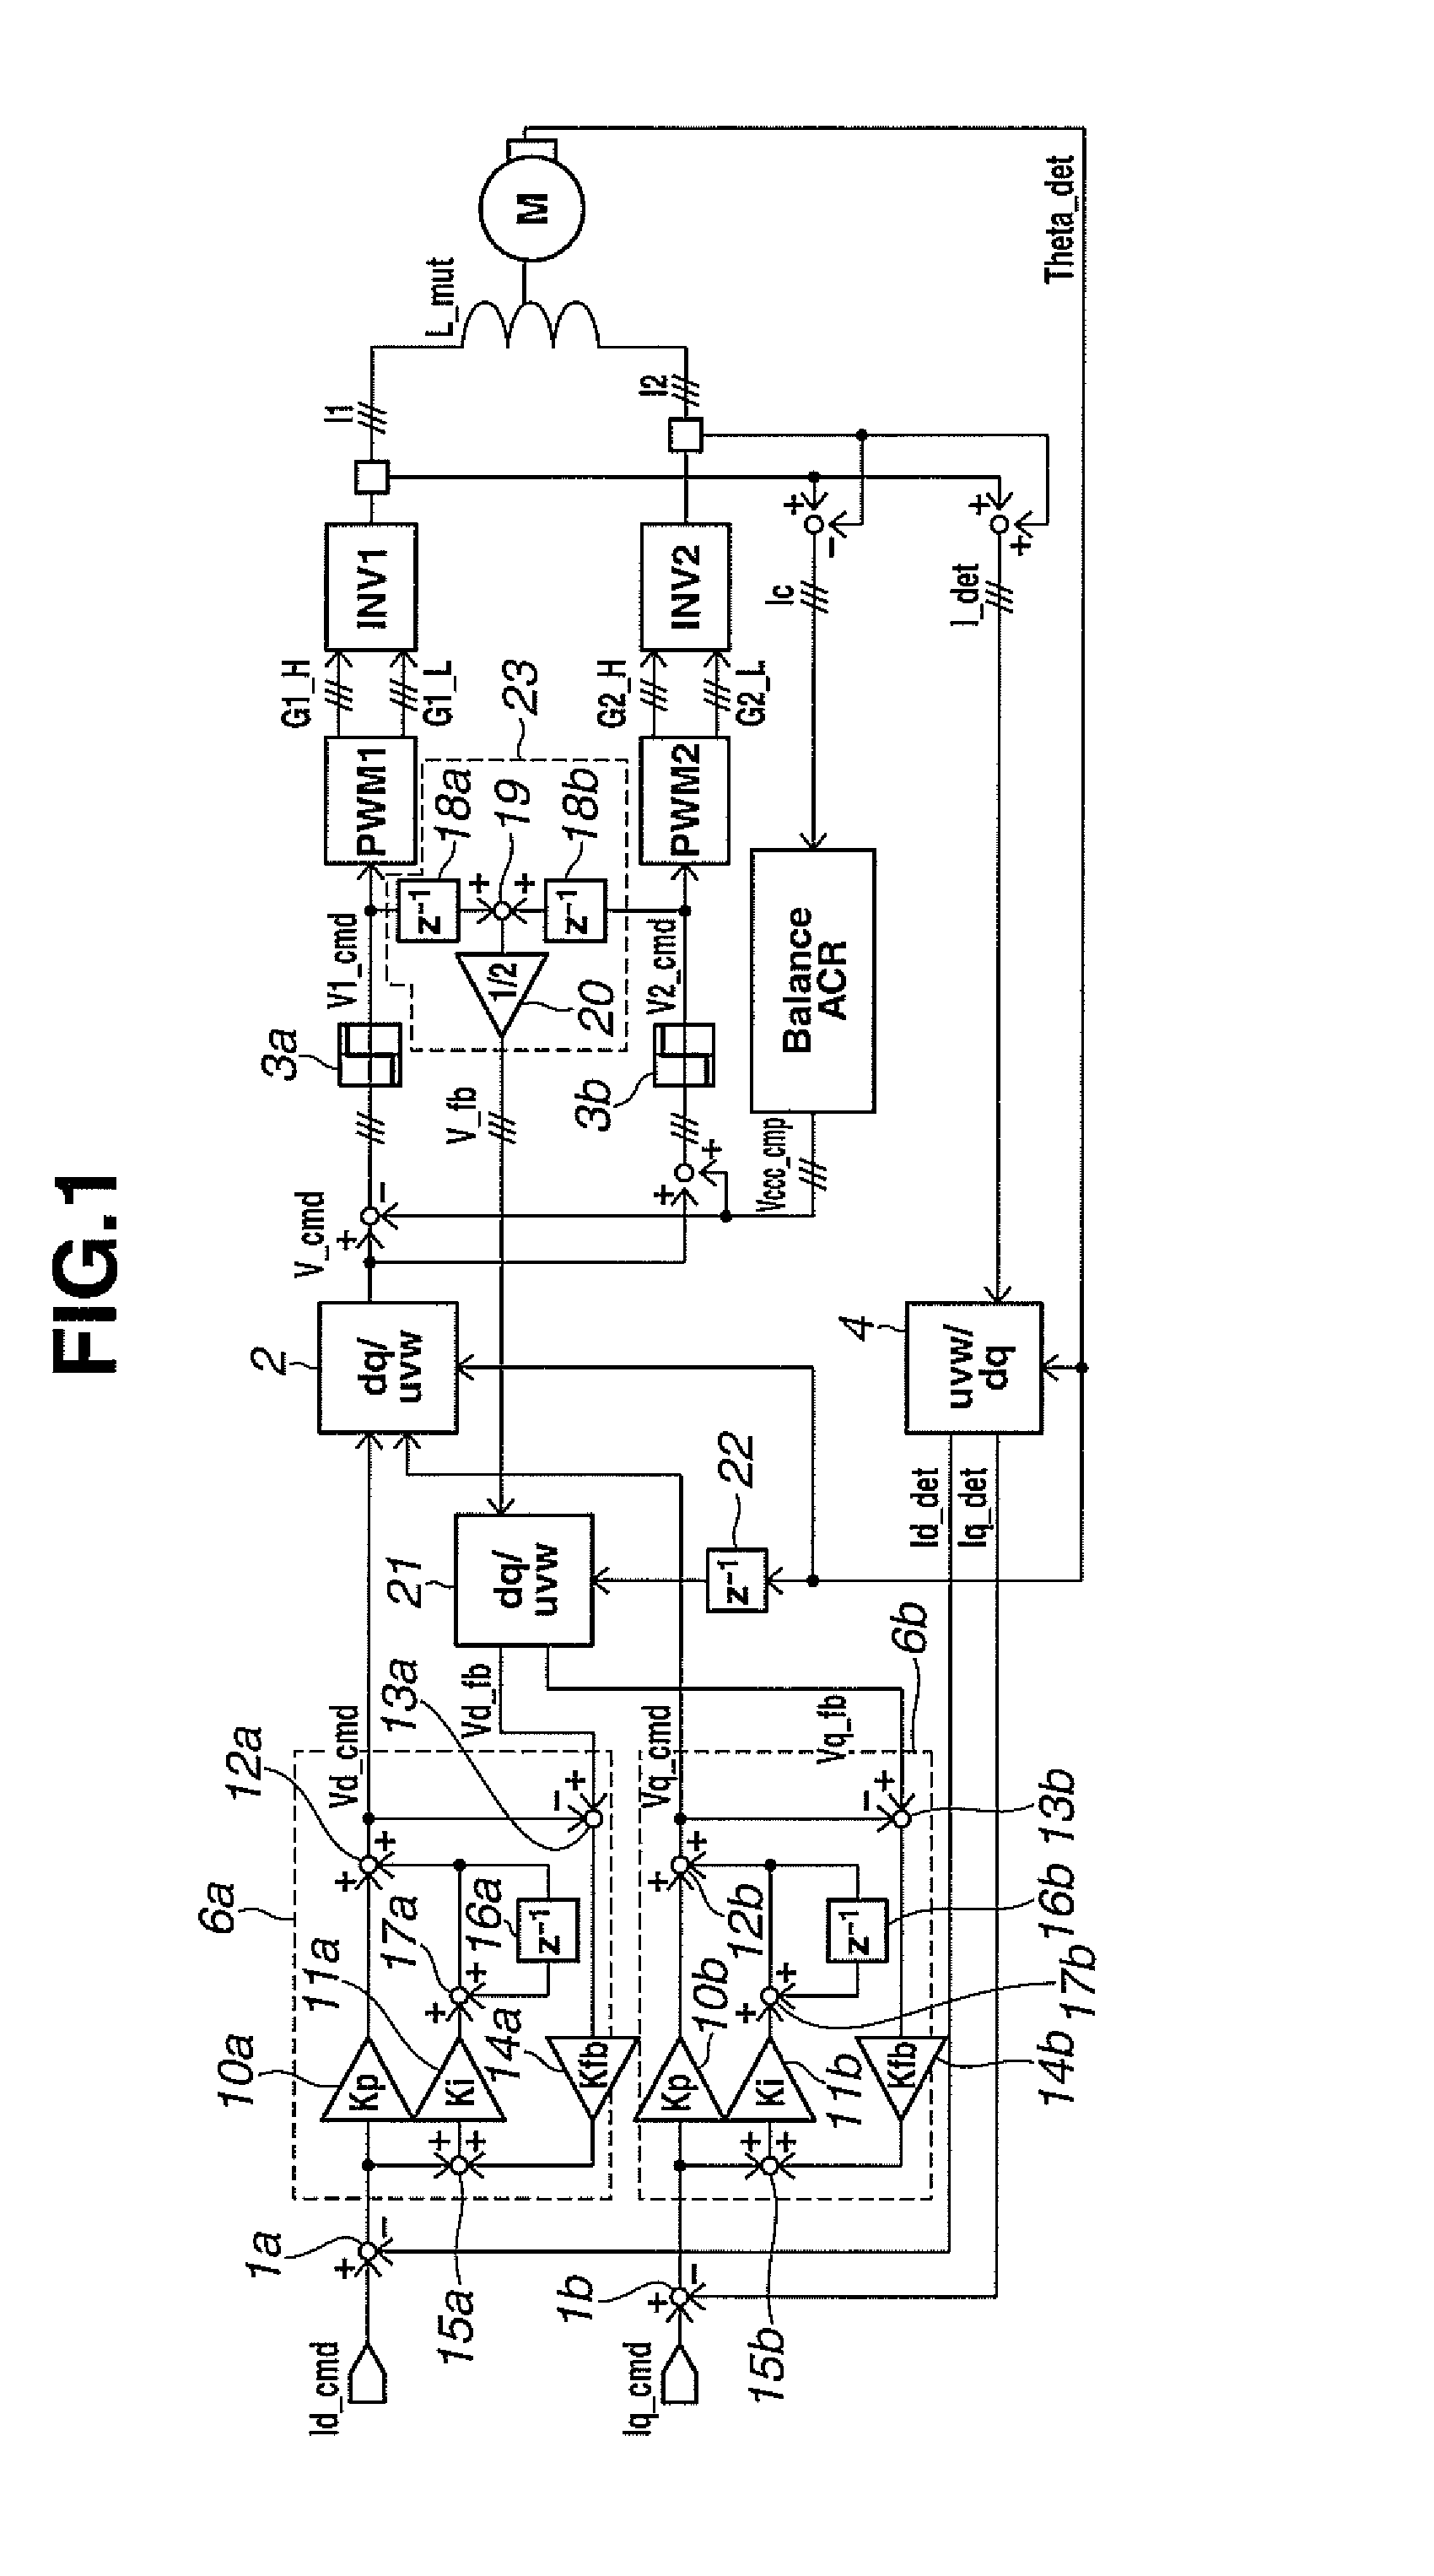 Apparatus for parallel operation of pulse-width modulation power converters